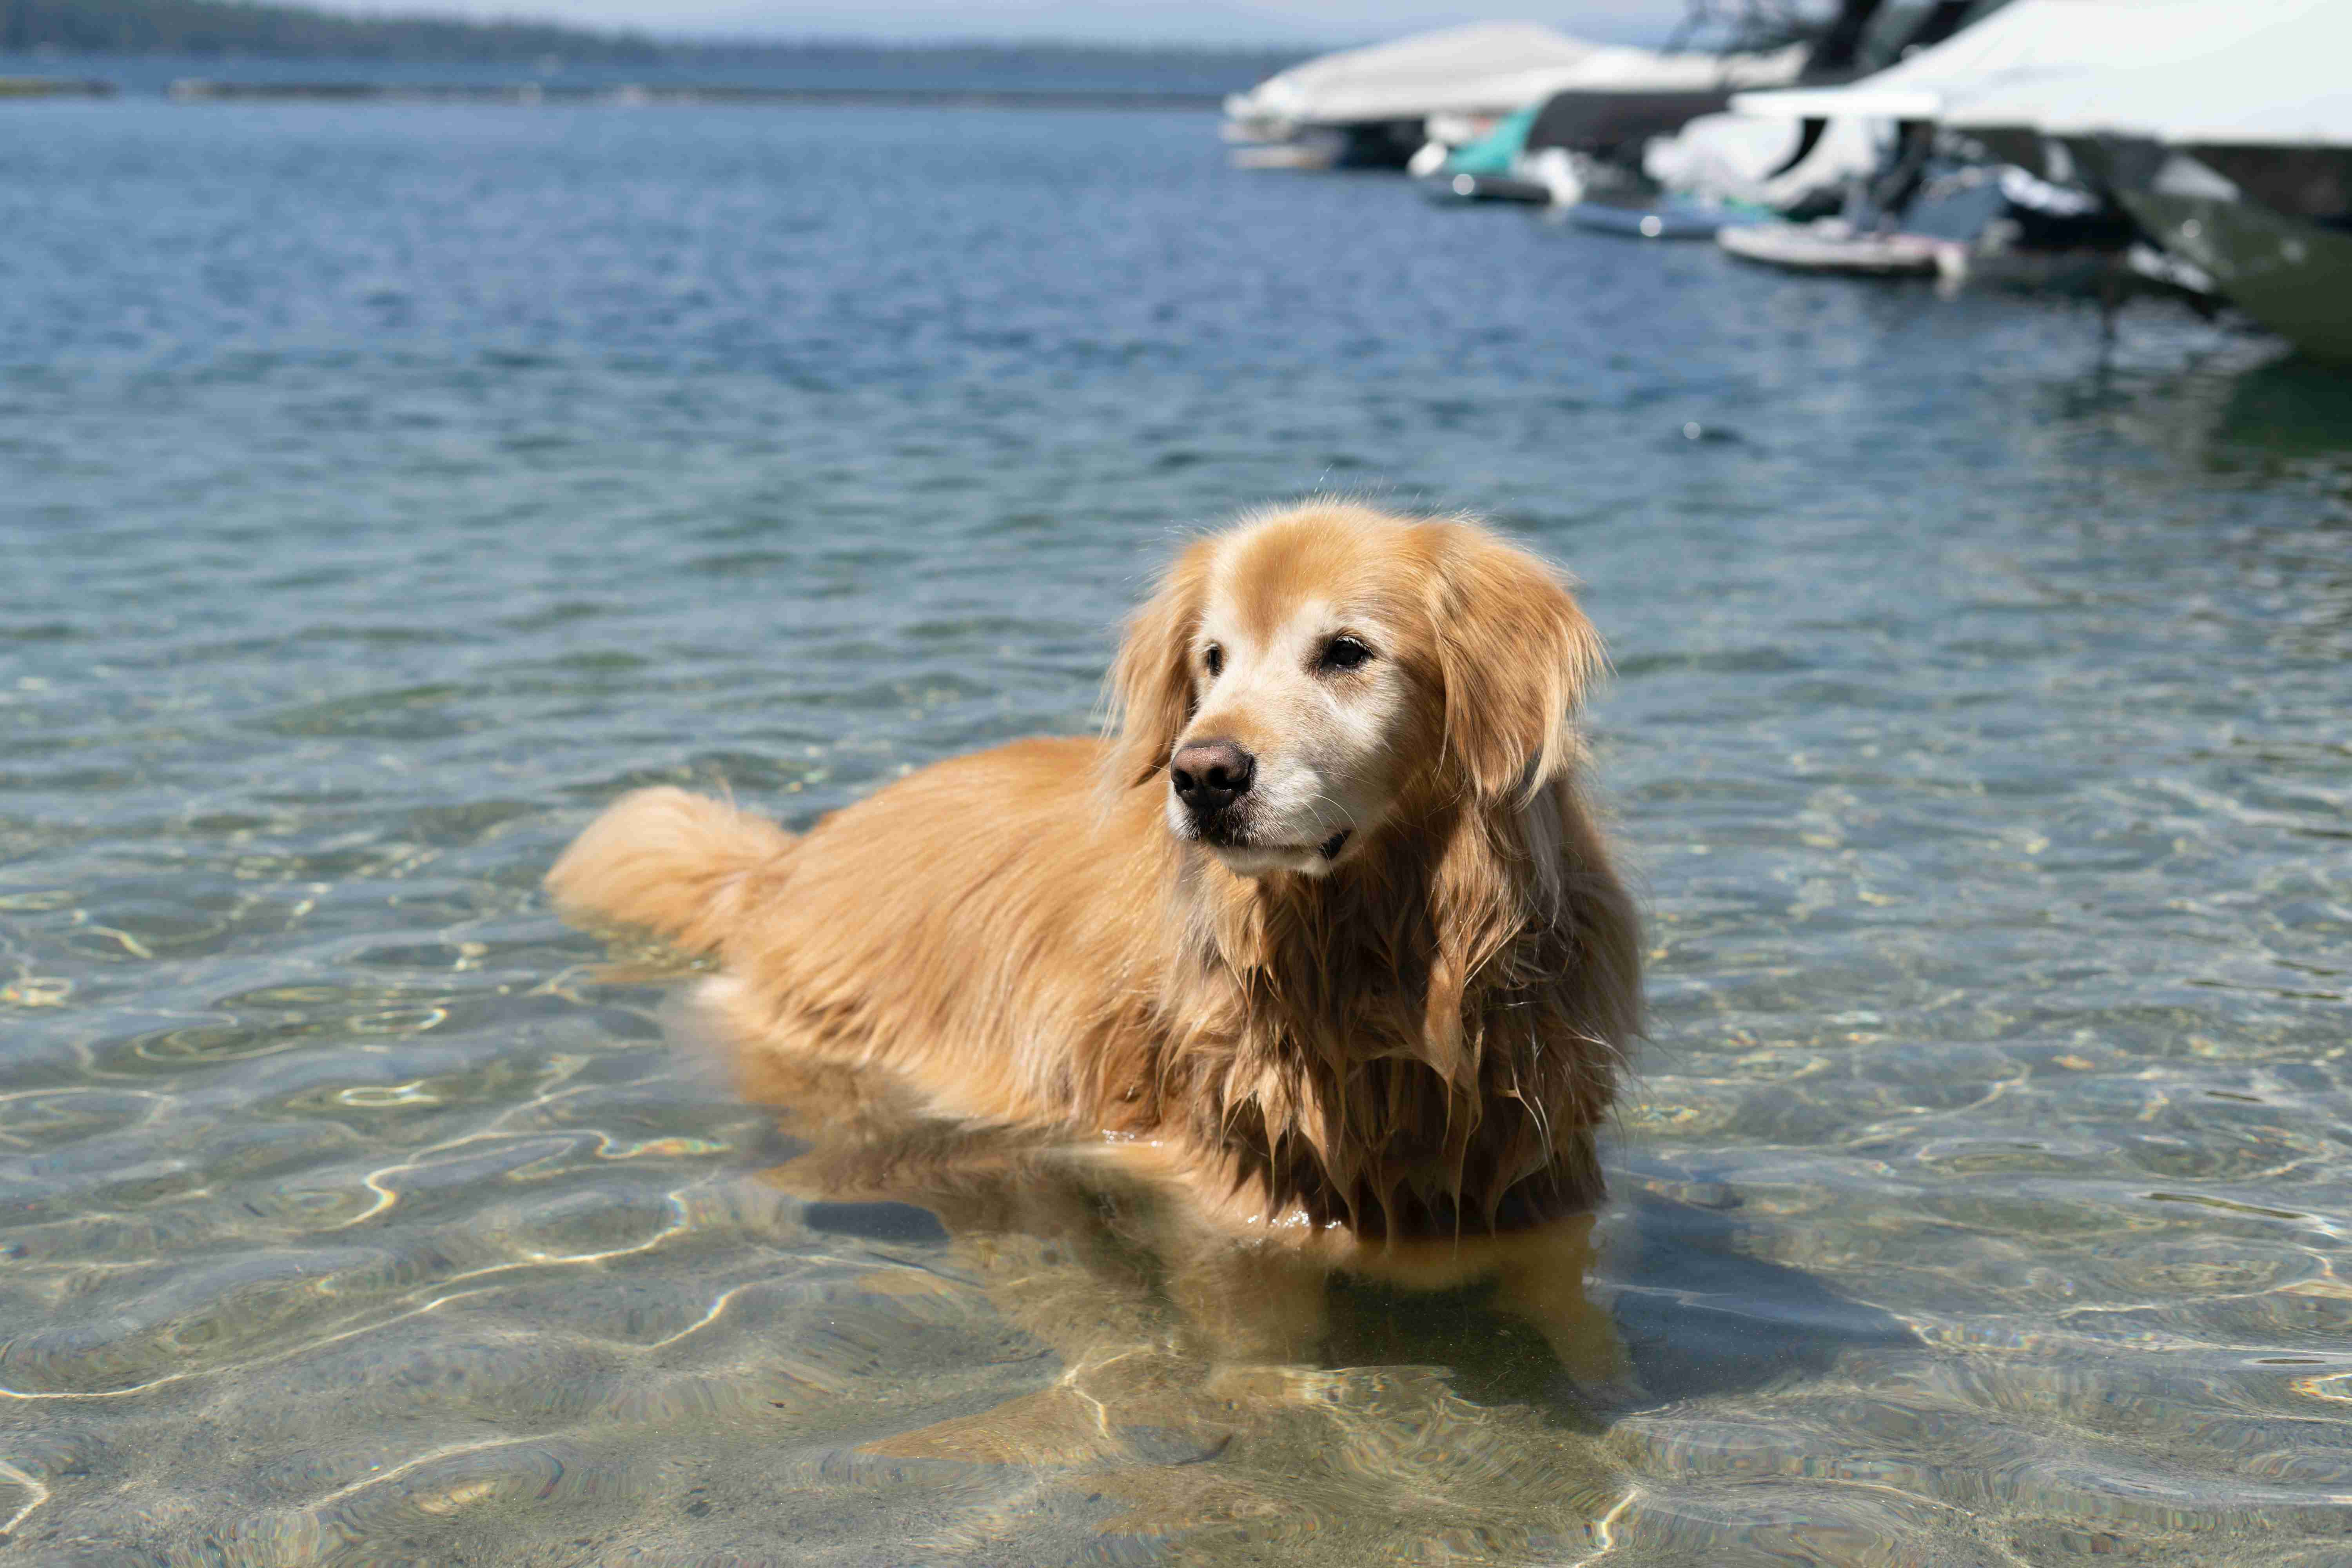 How can I prevent my golden retriever from developing skin infections?